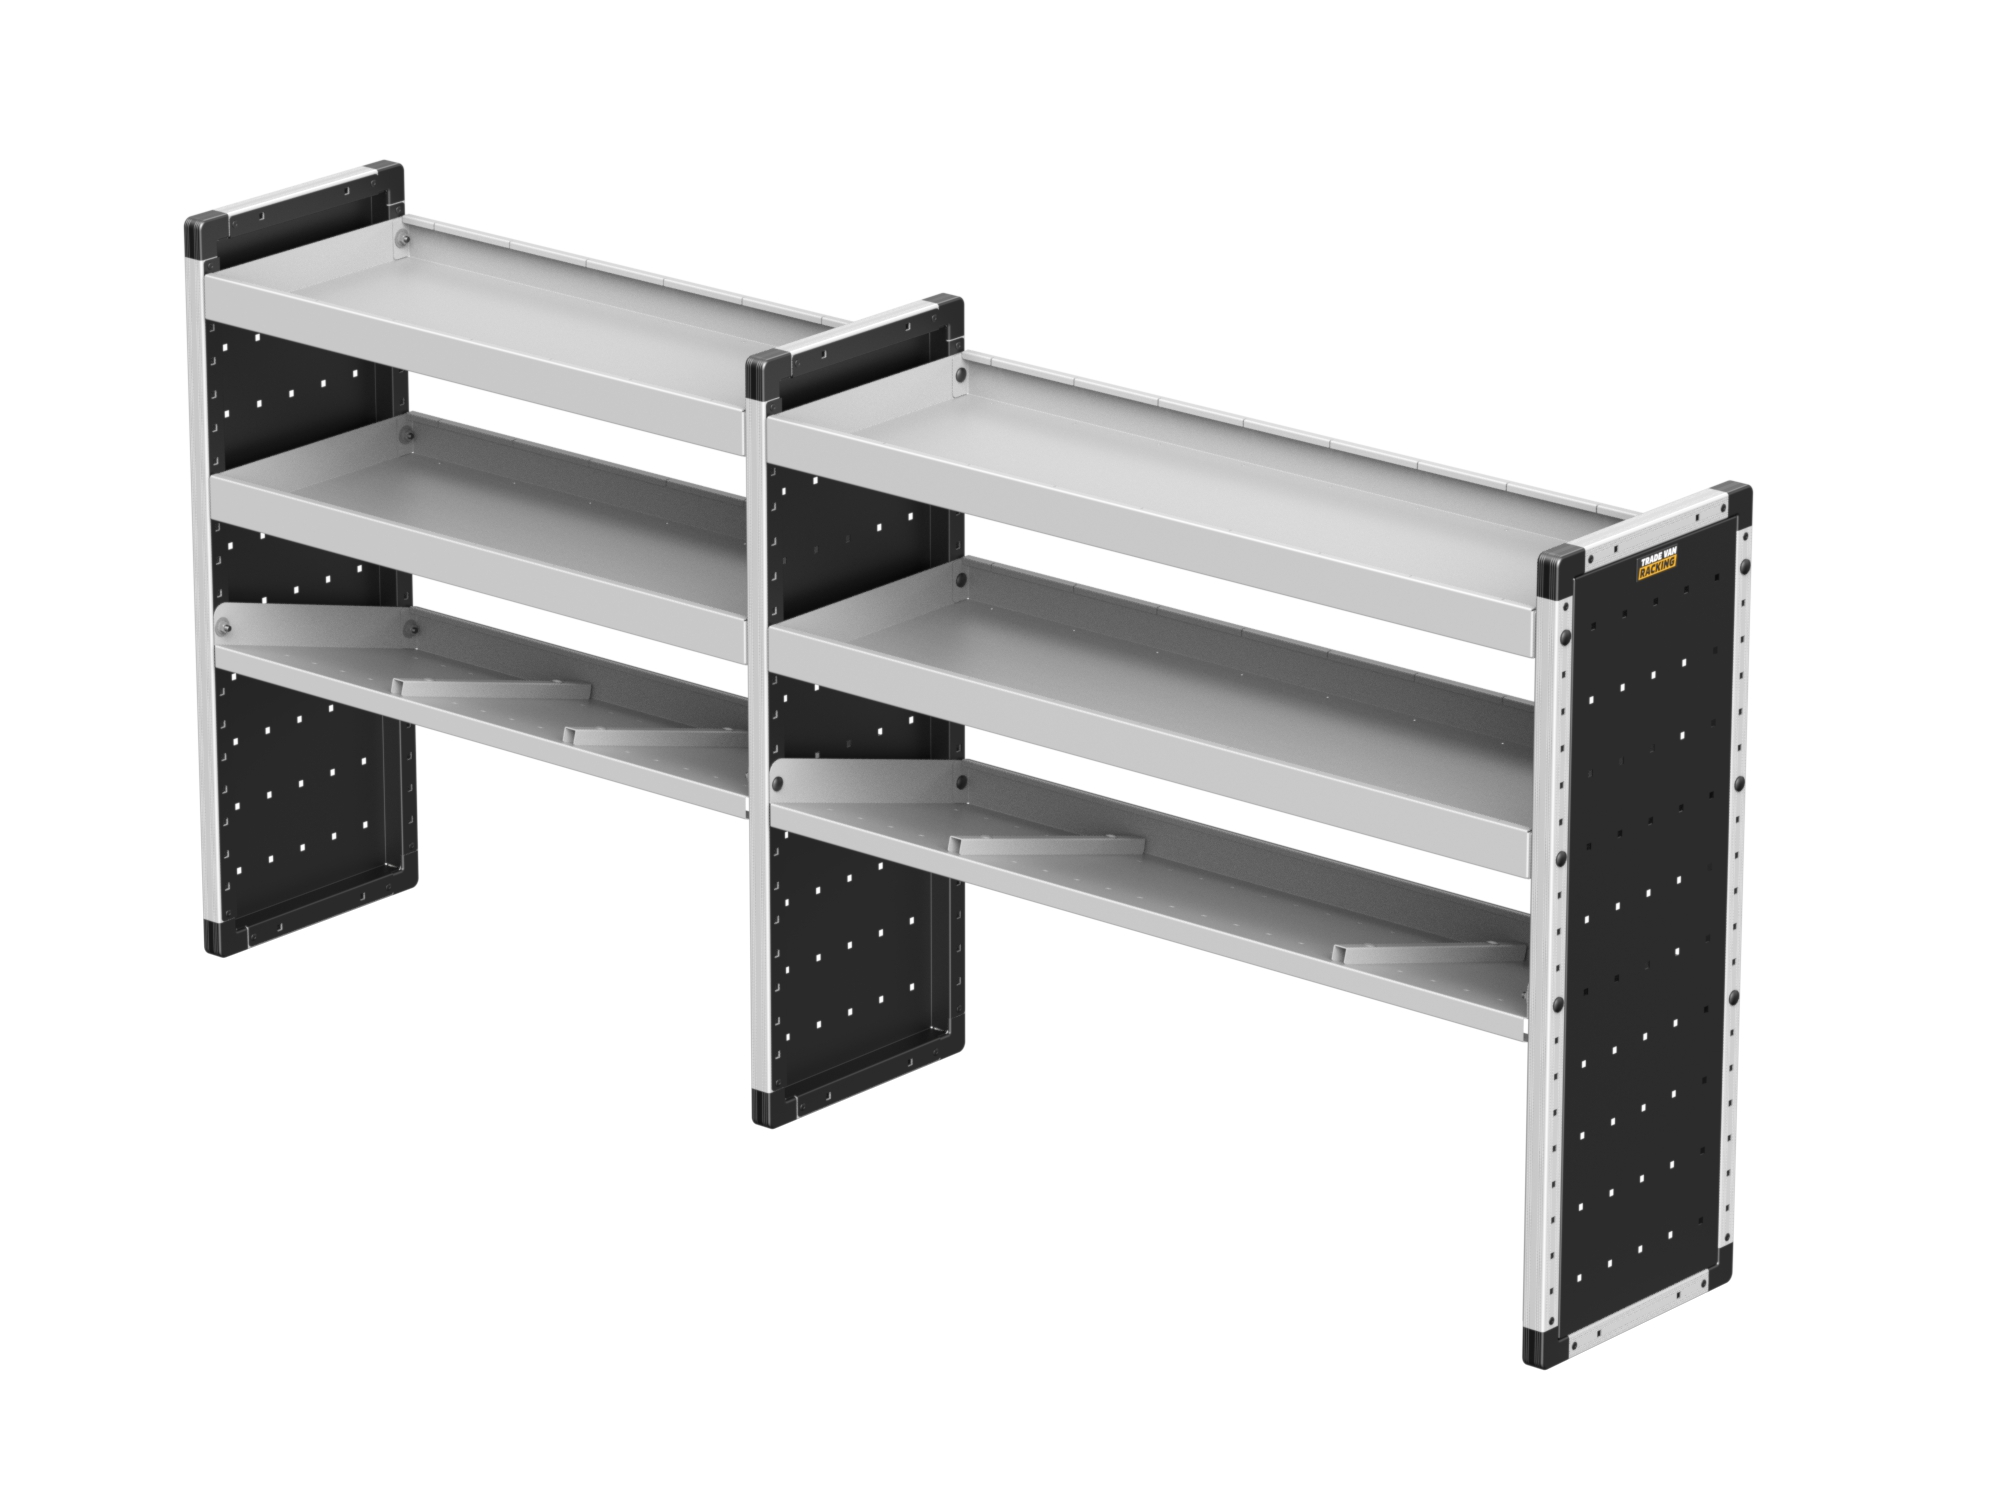 Trade Van Racking - Double Unit - 2 straight & 1 angled per bay - TVR-DBL-005